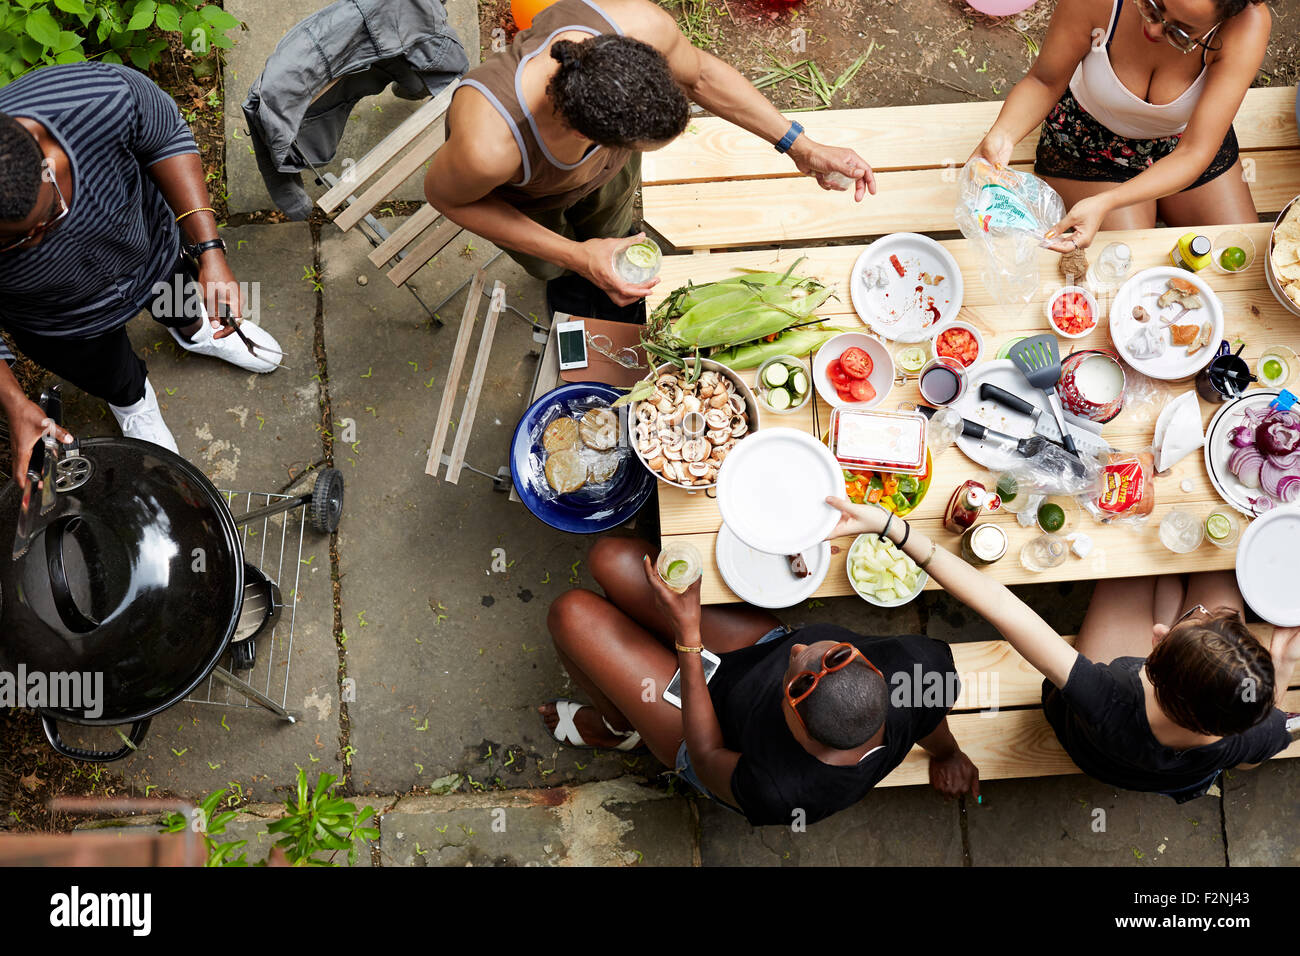 High angle view of friends eating at backyard barbecue Stock Photo